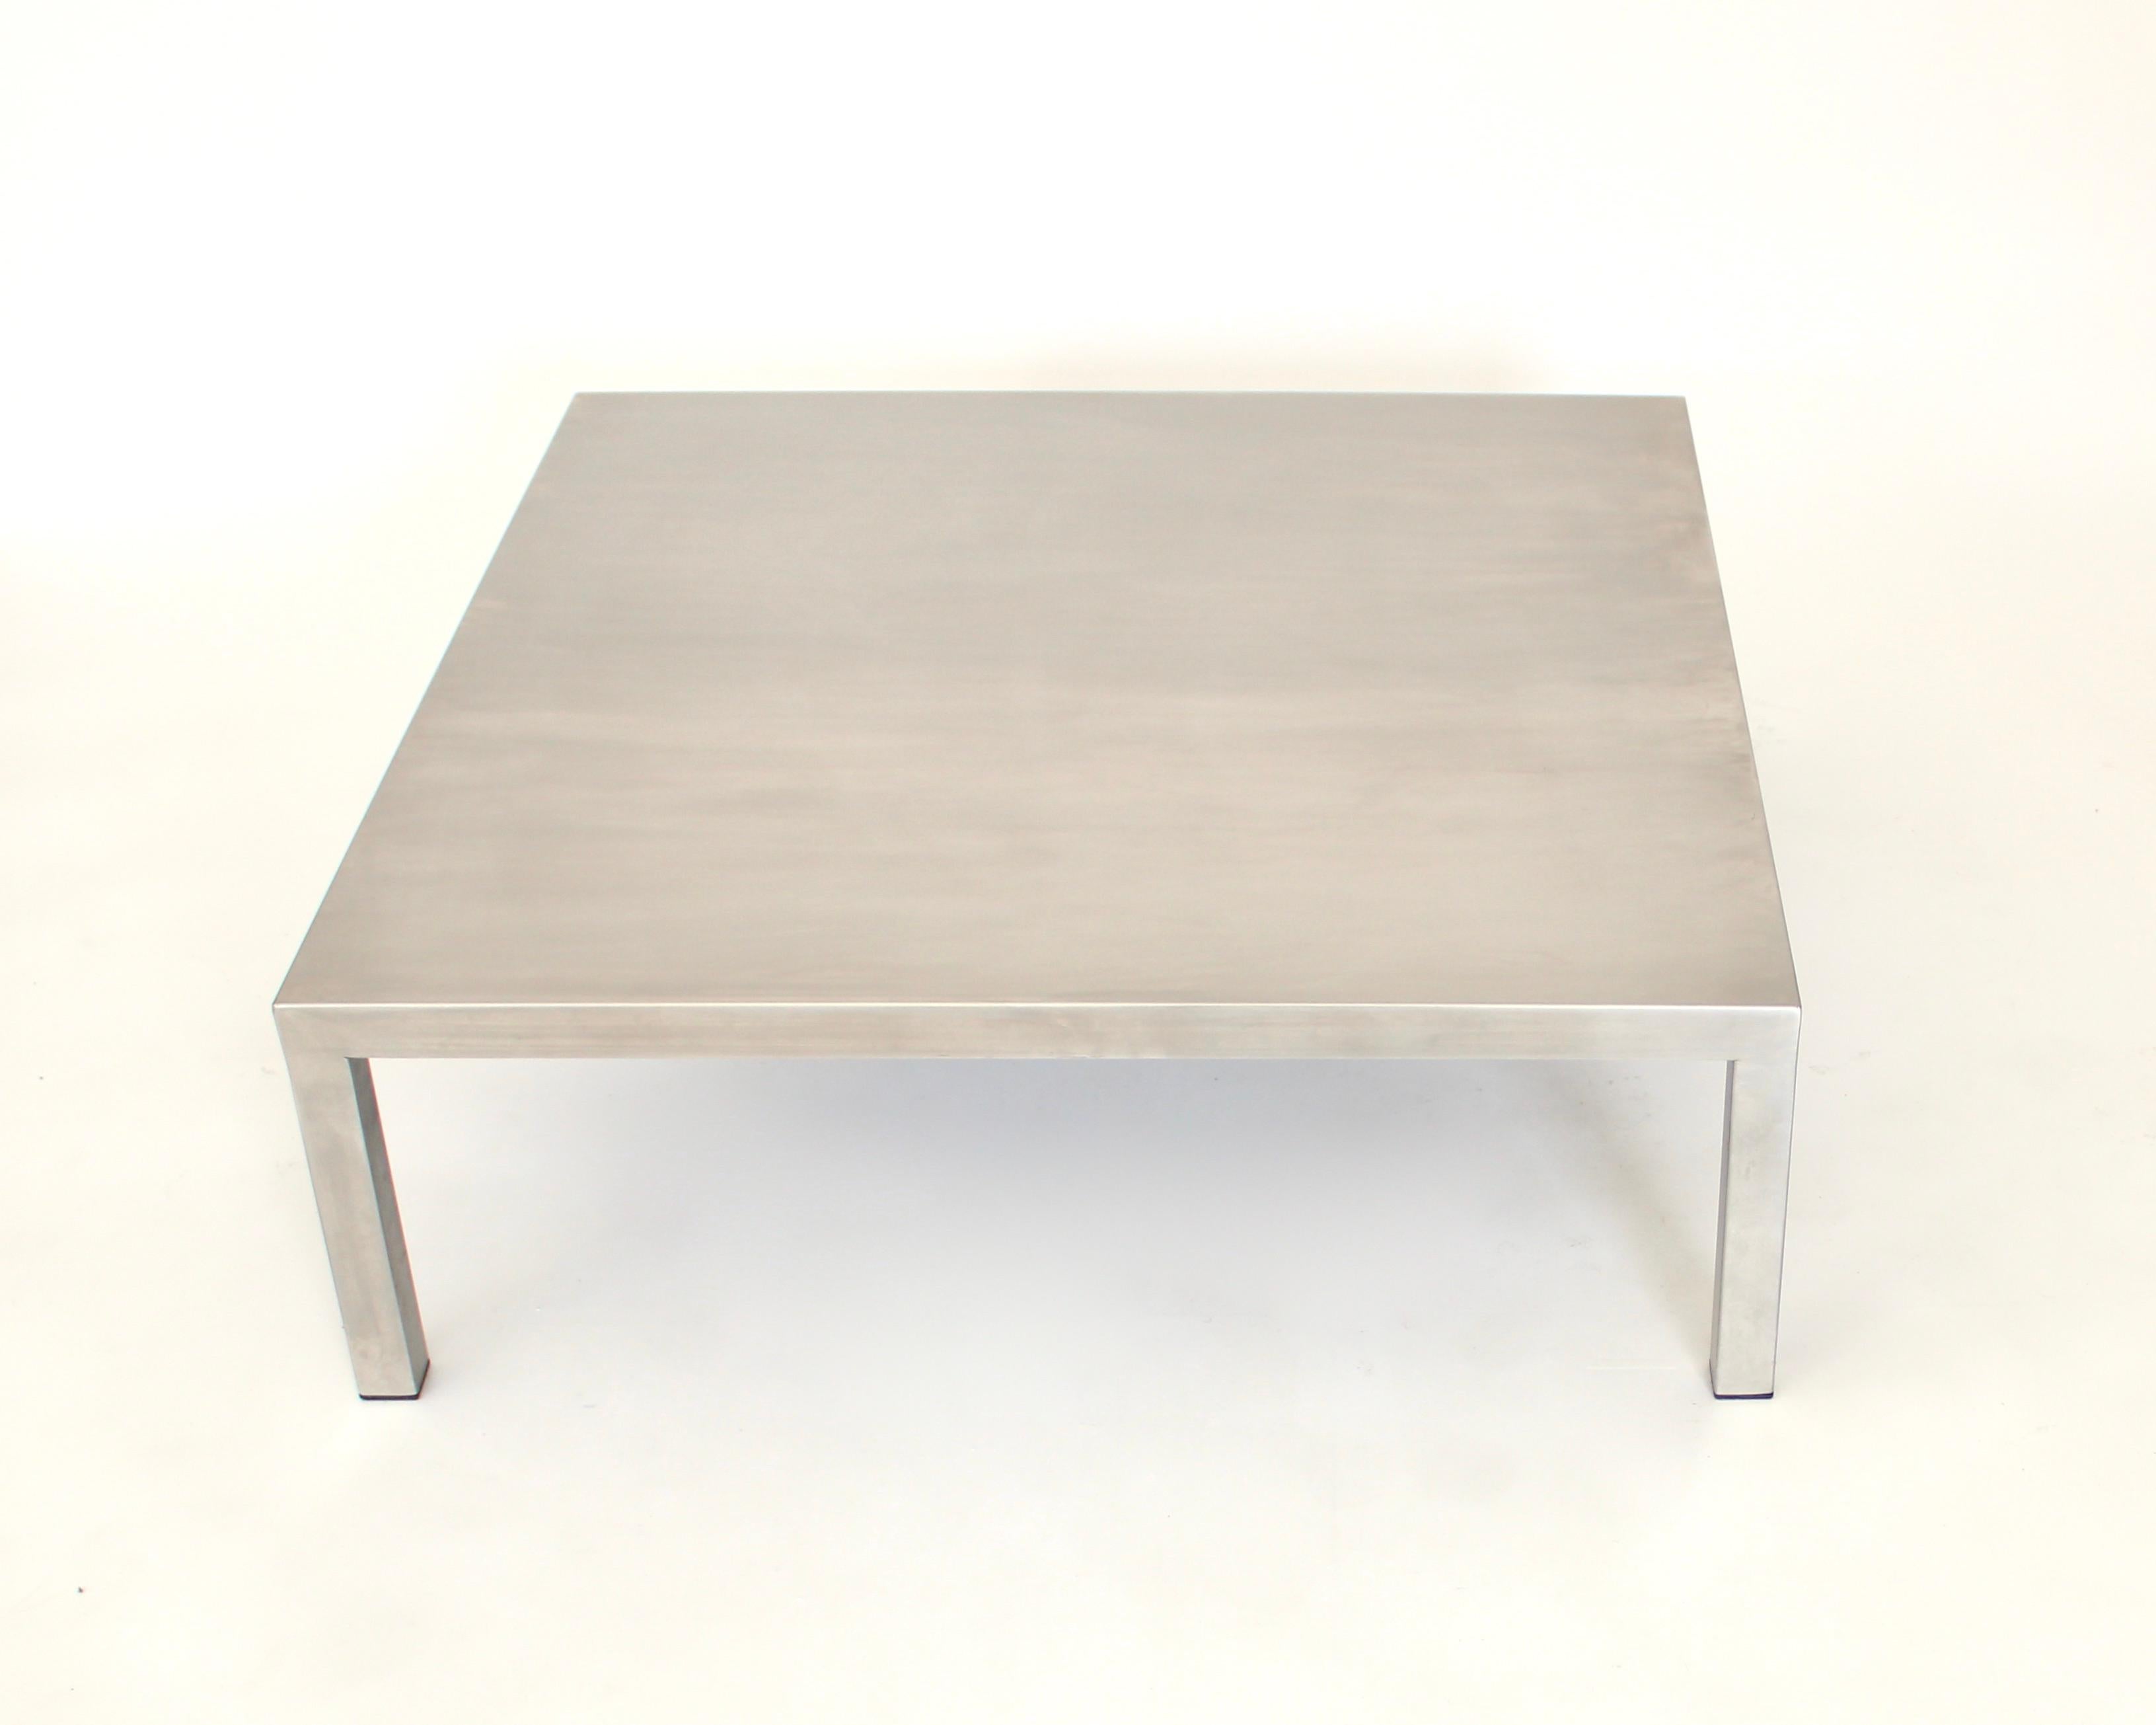 Late 20th Century Maria Pergay Large Square French Stainless Steel Coffee Table, circa 1970